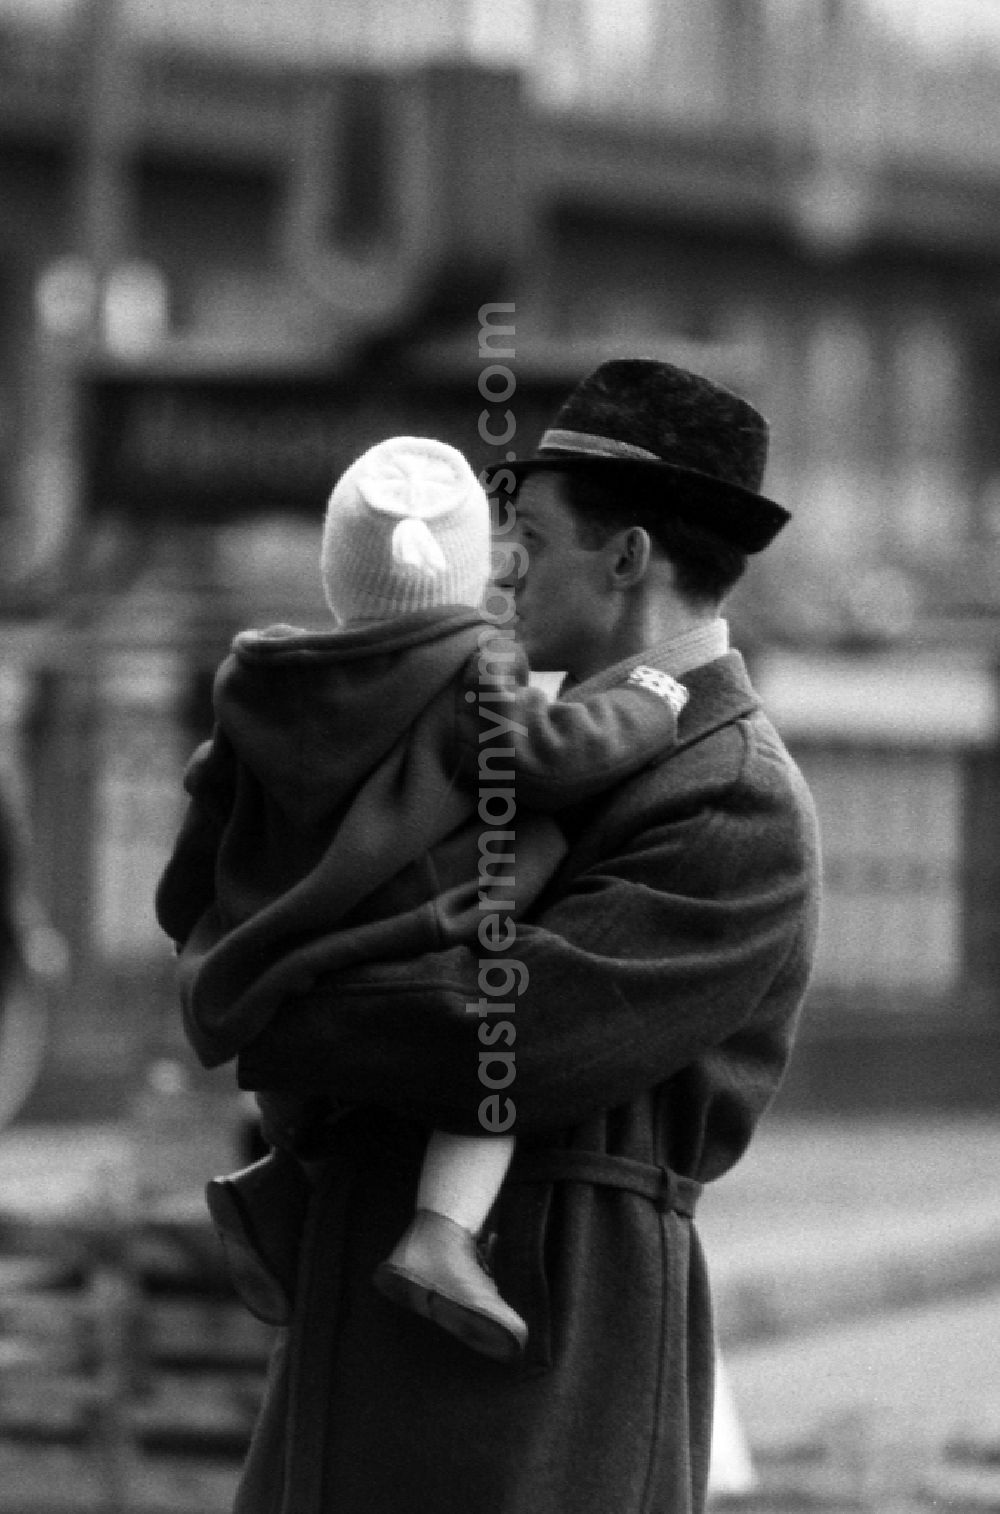 GDR image archive: Berlin - Father holds his child in his arms in East Berlin in the territory of the former GDR, German Democratic Republic